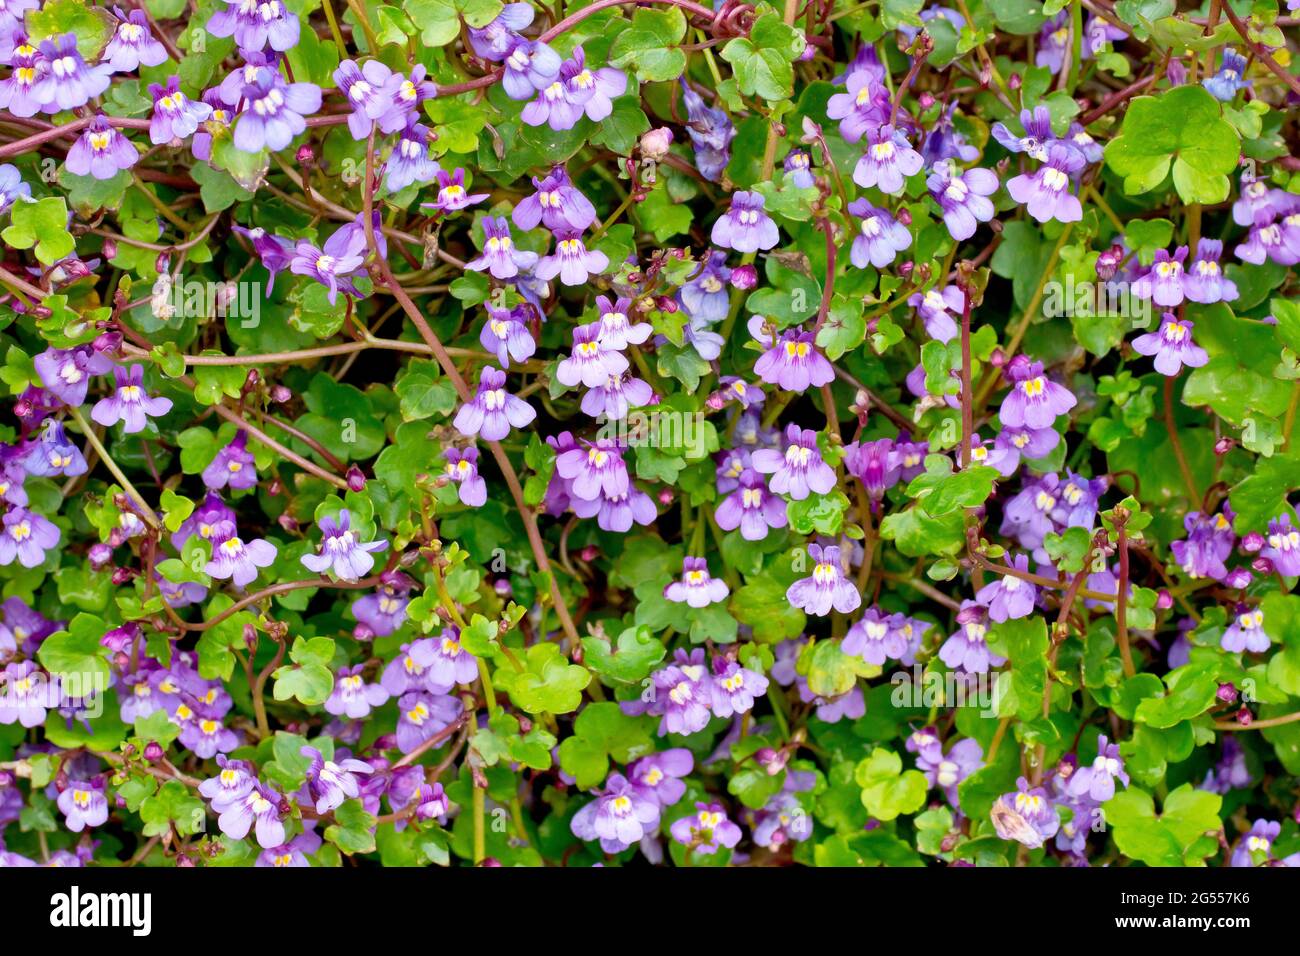 Ivy-leaved Toadflax (cymbalaria muralis), close up showng a mass of flowers growing at the base of a wall. Stock Photo